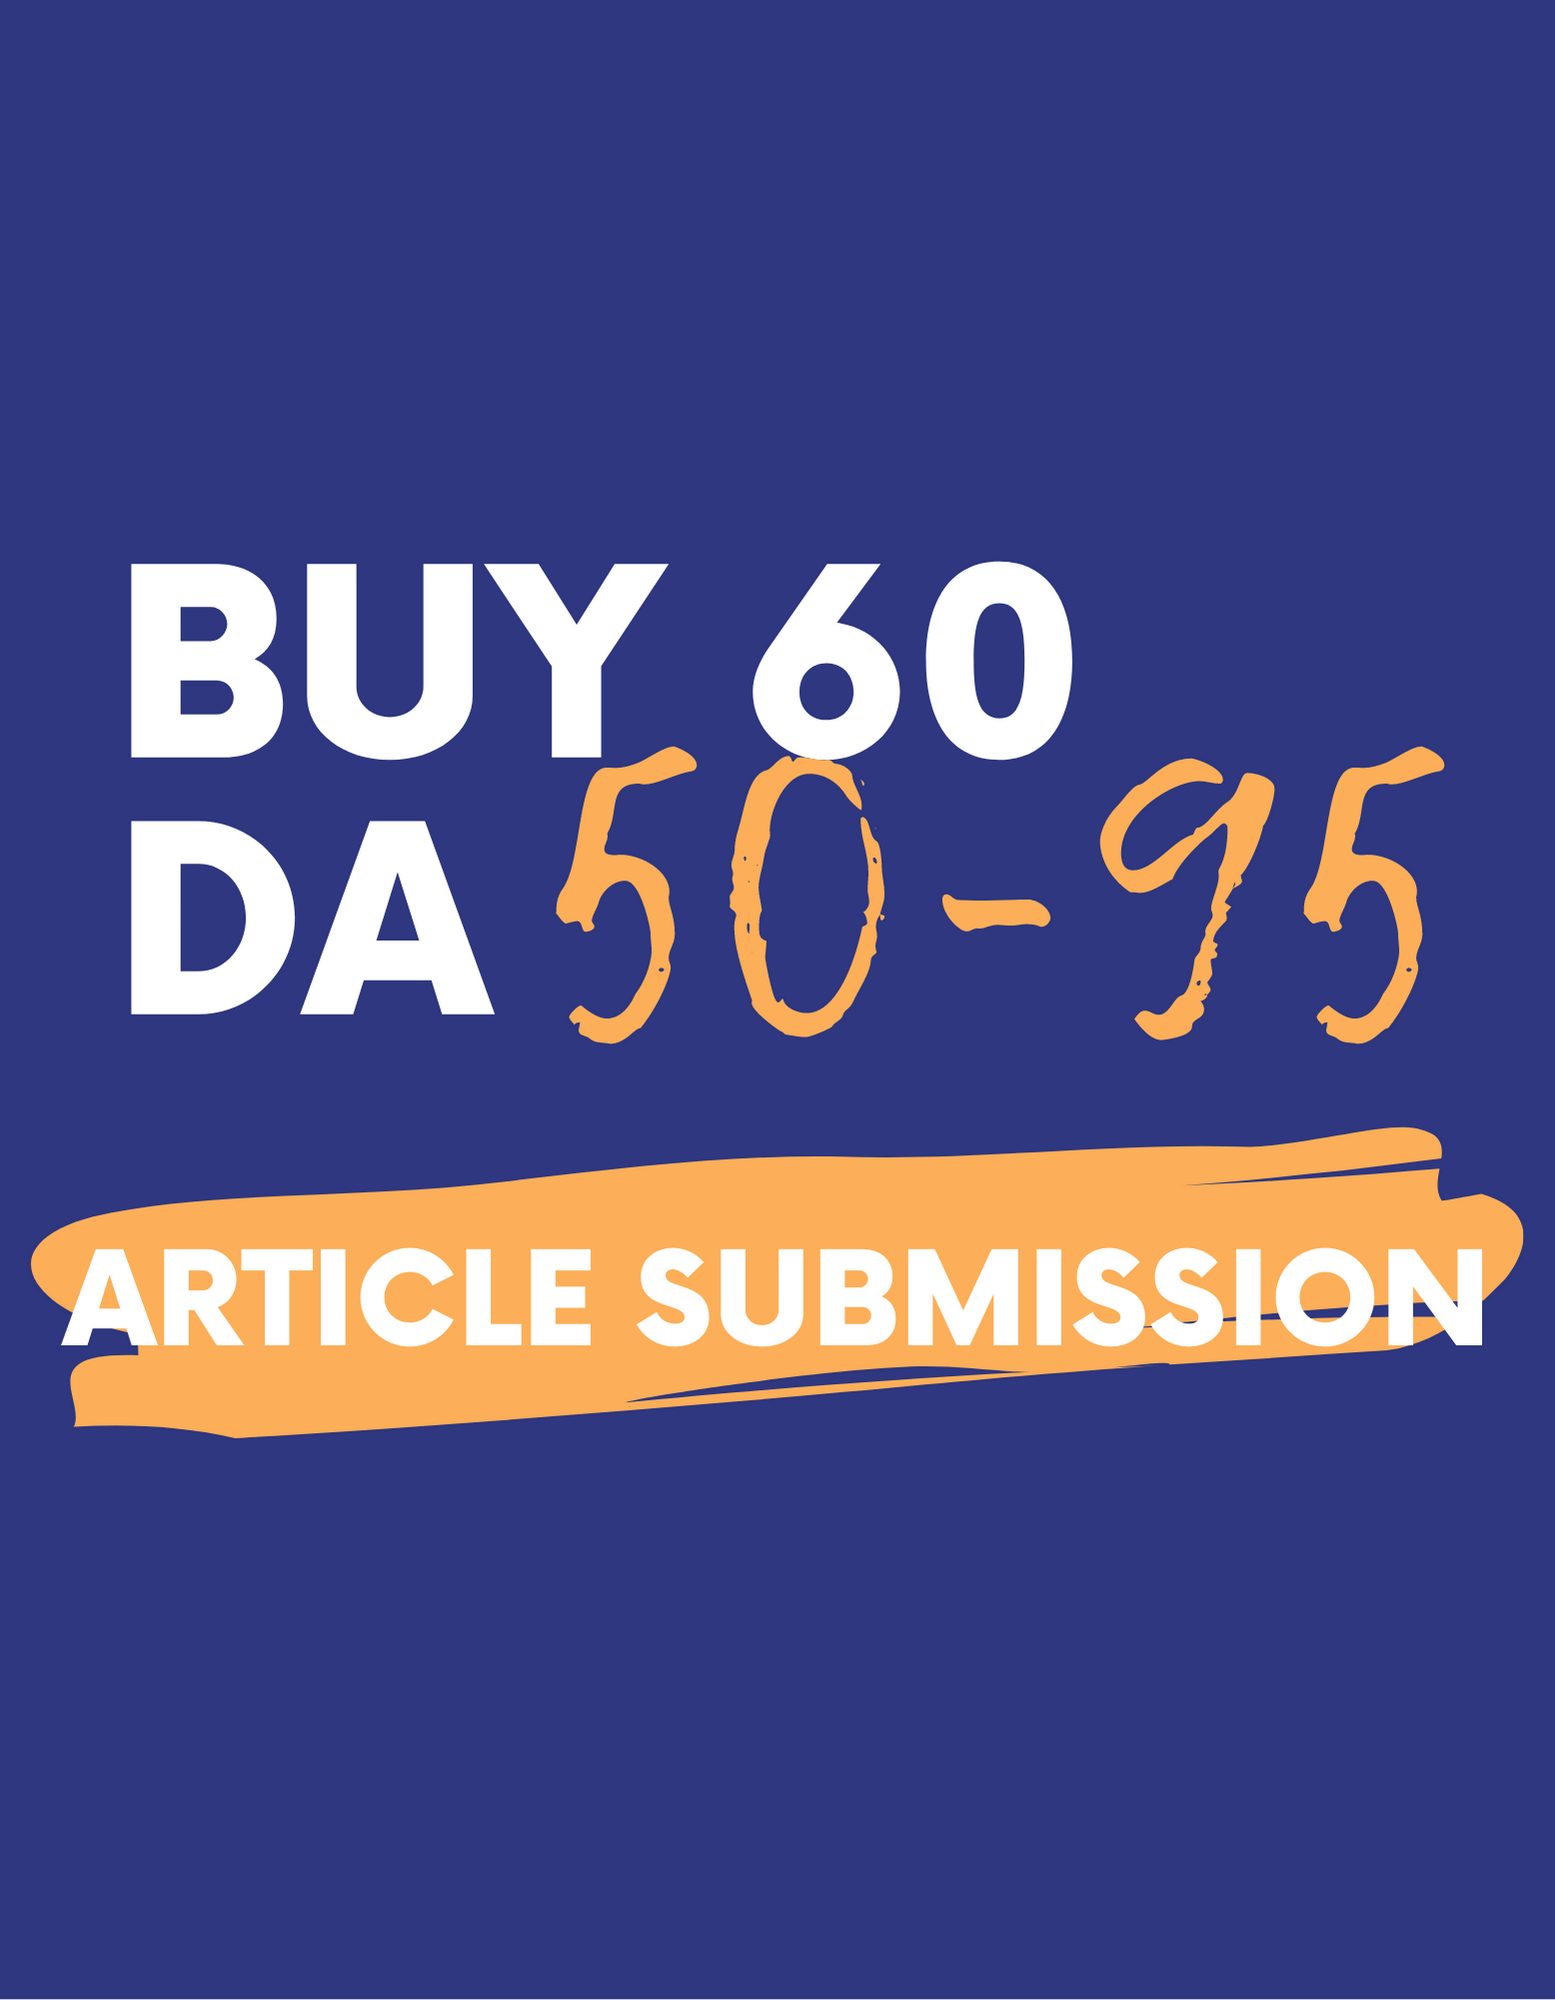 I l rank website with 60 DA 95-50 article submission 